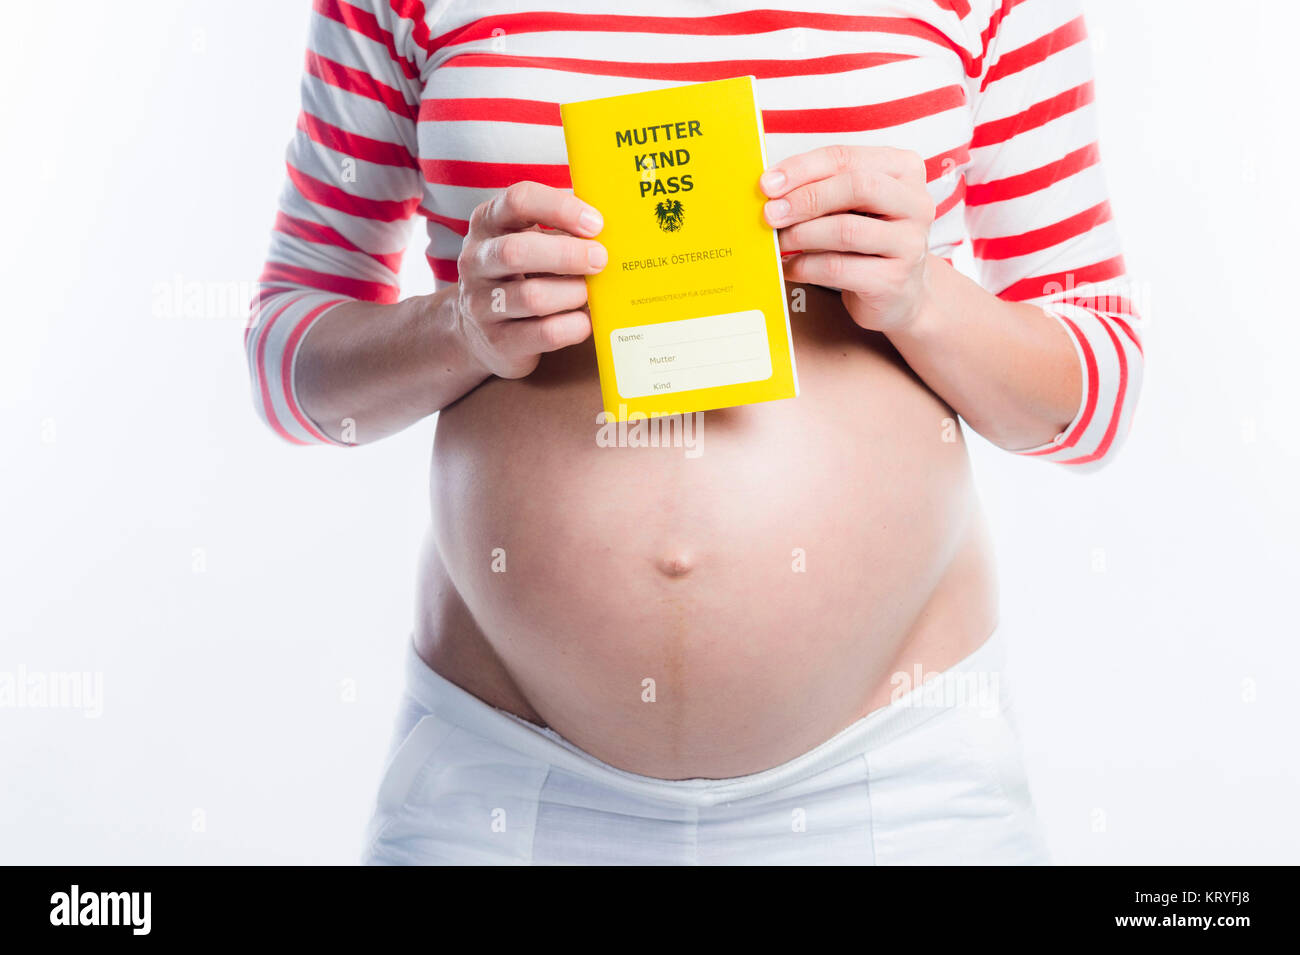 Schwangere Frau mit Mutter-Kind-Pass - pregnant woman with Mother-Child-Pass Stock Photo